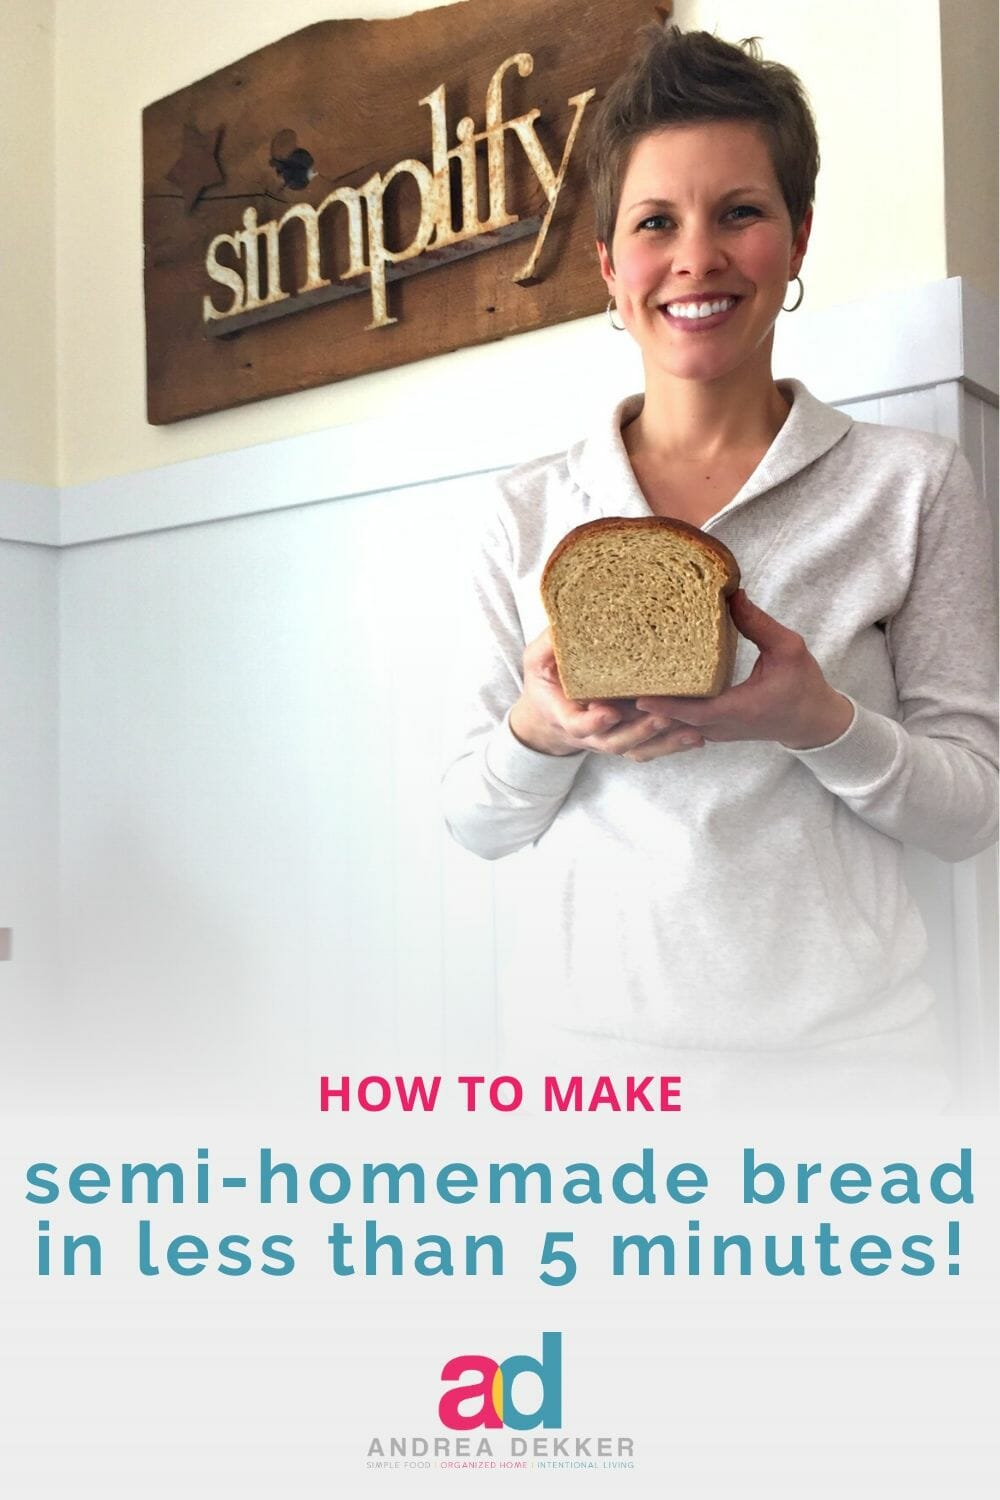 If you love the smell and the taste of homemade bread, but don't want to spend half your day in the kitchen with a pile of dirty dishes to wash, this semi-homemade bread secret will BLOW YOUR MIND!  via @andreadekker